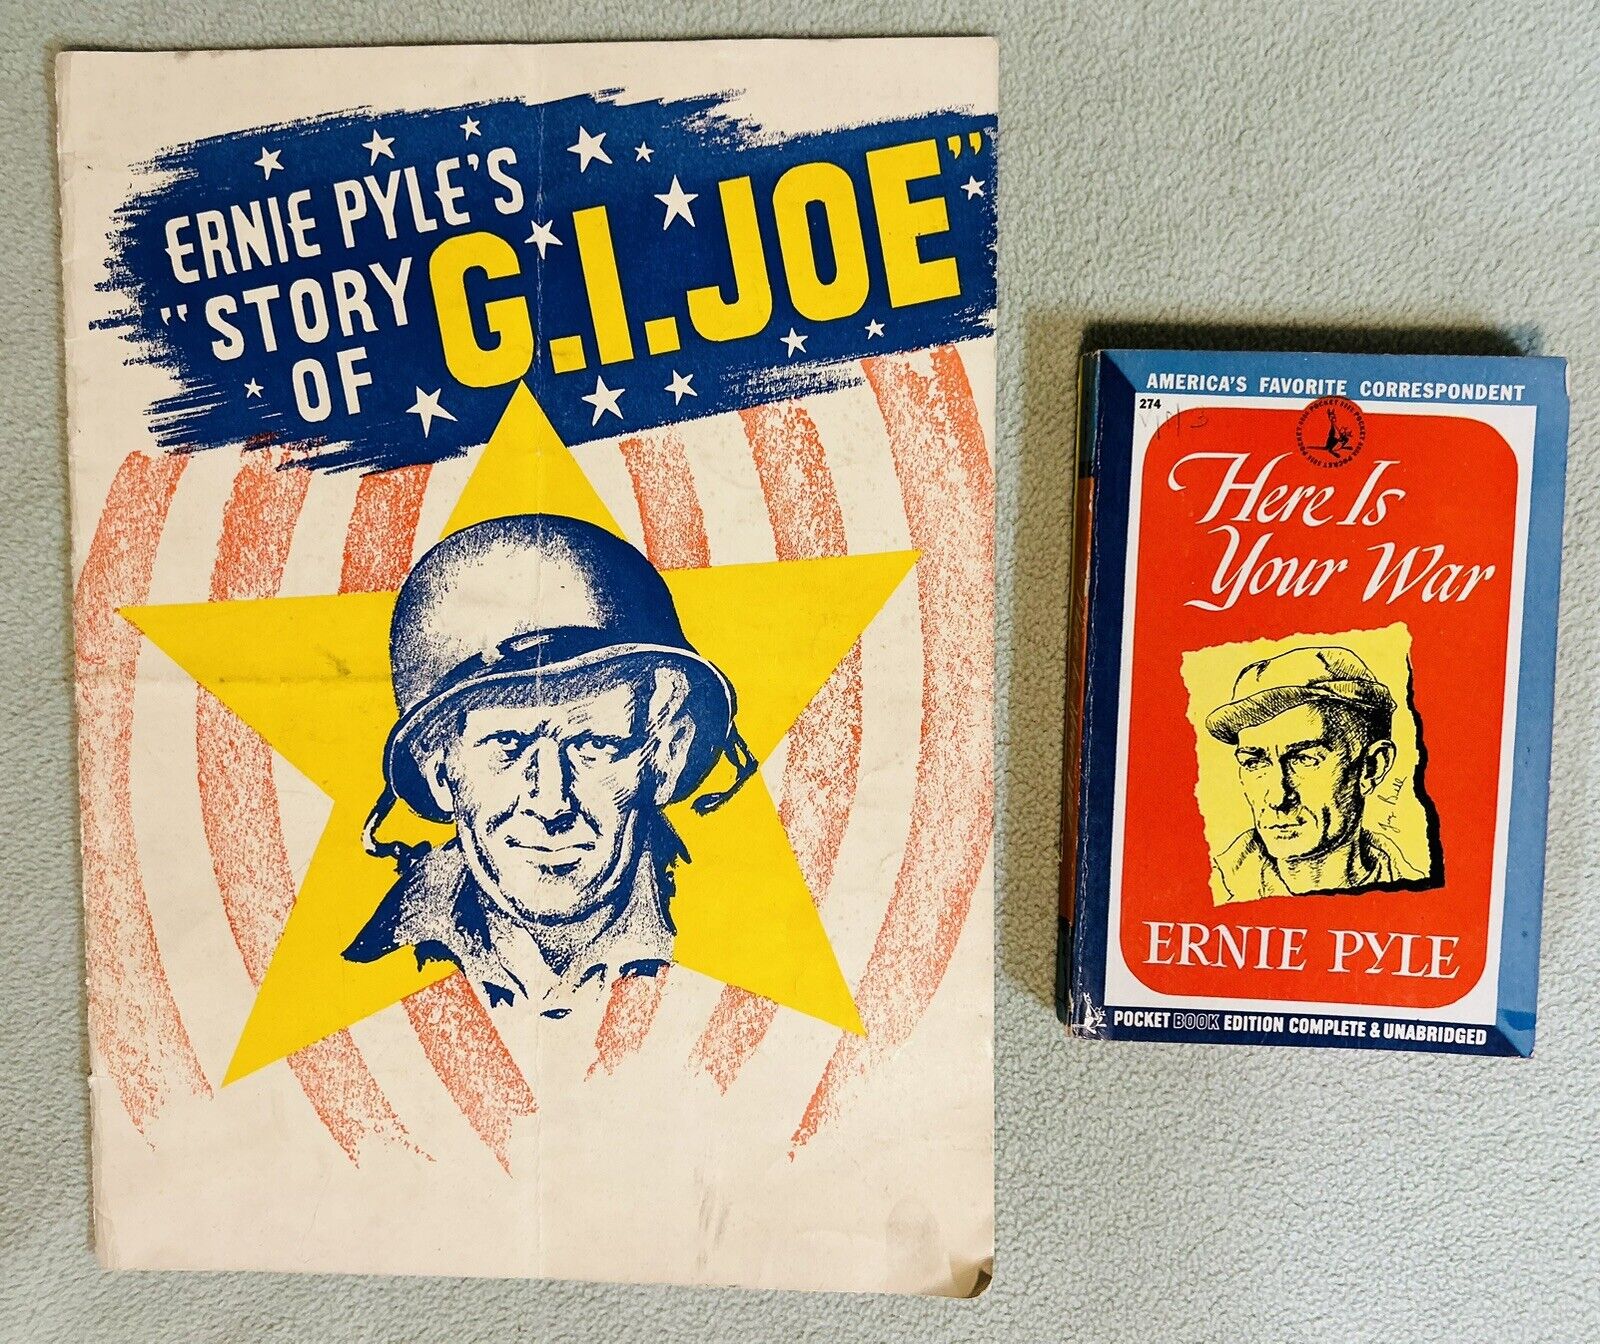 WWII Ernie Pyle  “Story Of G.I. Joe” Official Program & “Here Is Your War” Book